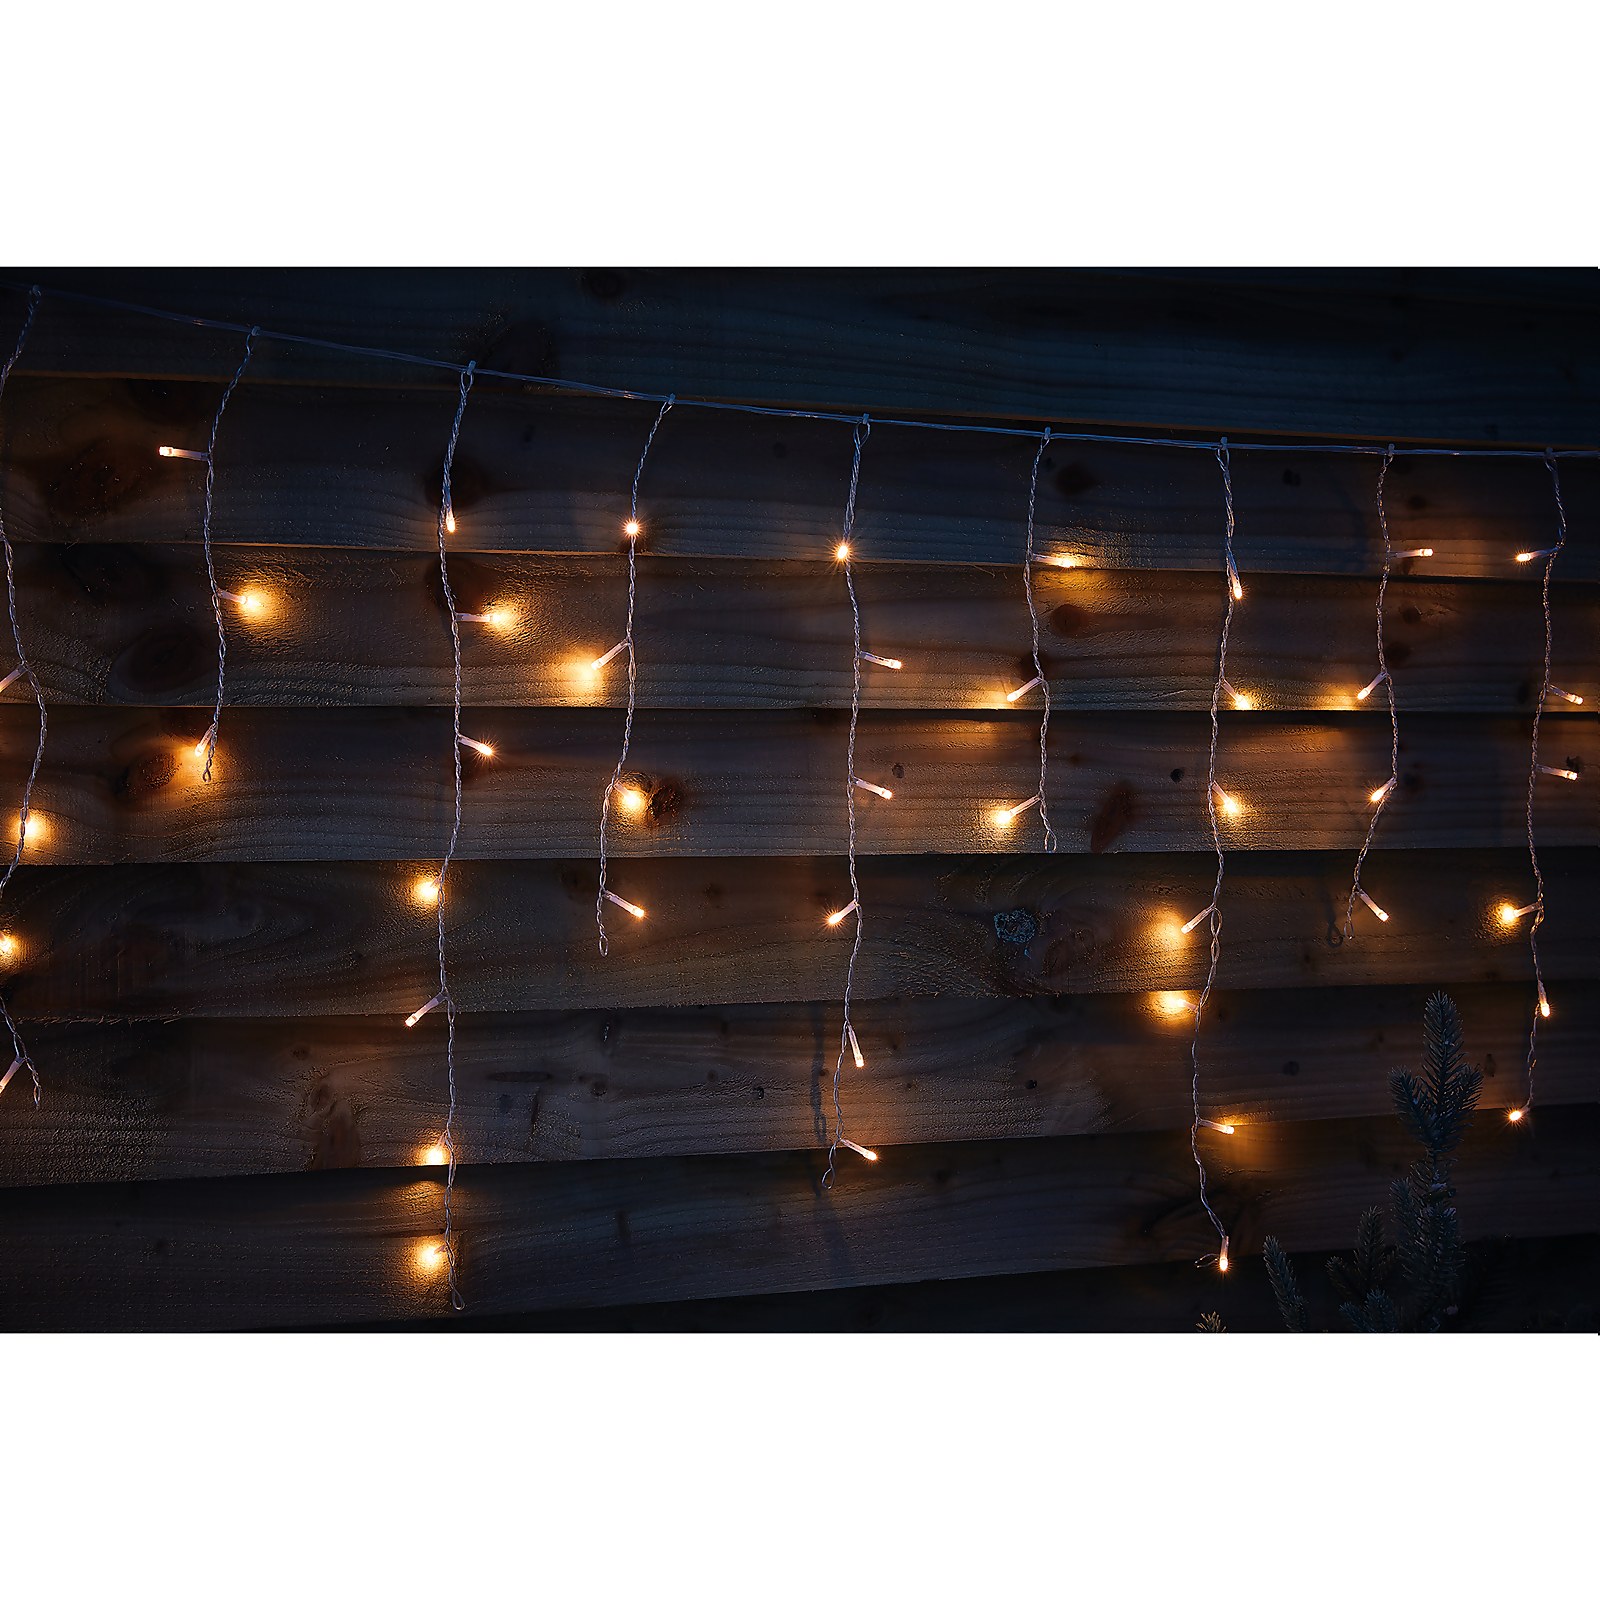 Photo of 480 Led Timer Icicle String Christmas Lights - Warm White